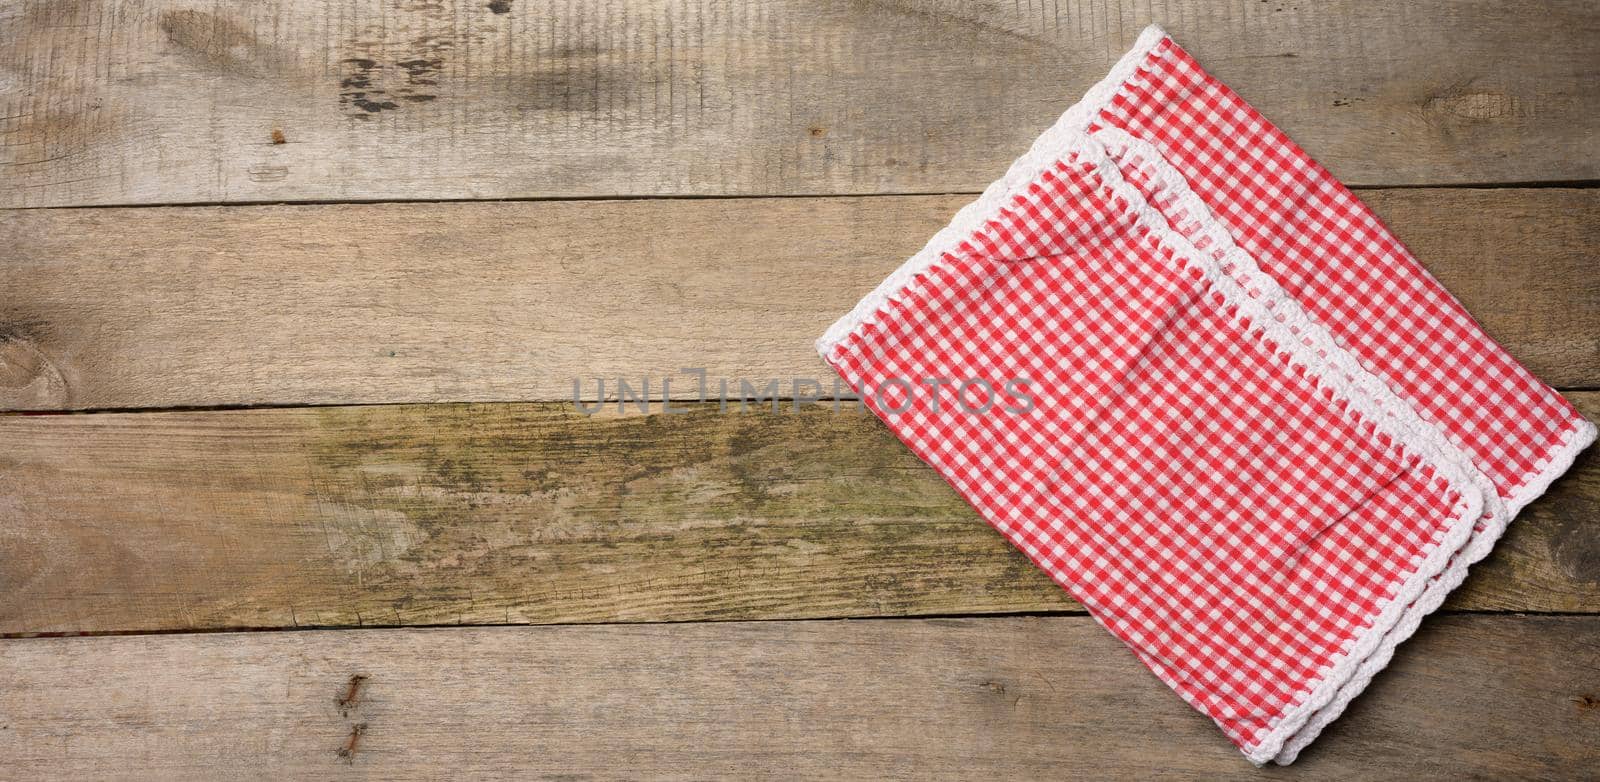 folded red and white cotton kitchen napkin on a wooden gray background by ndanko